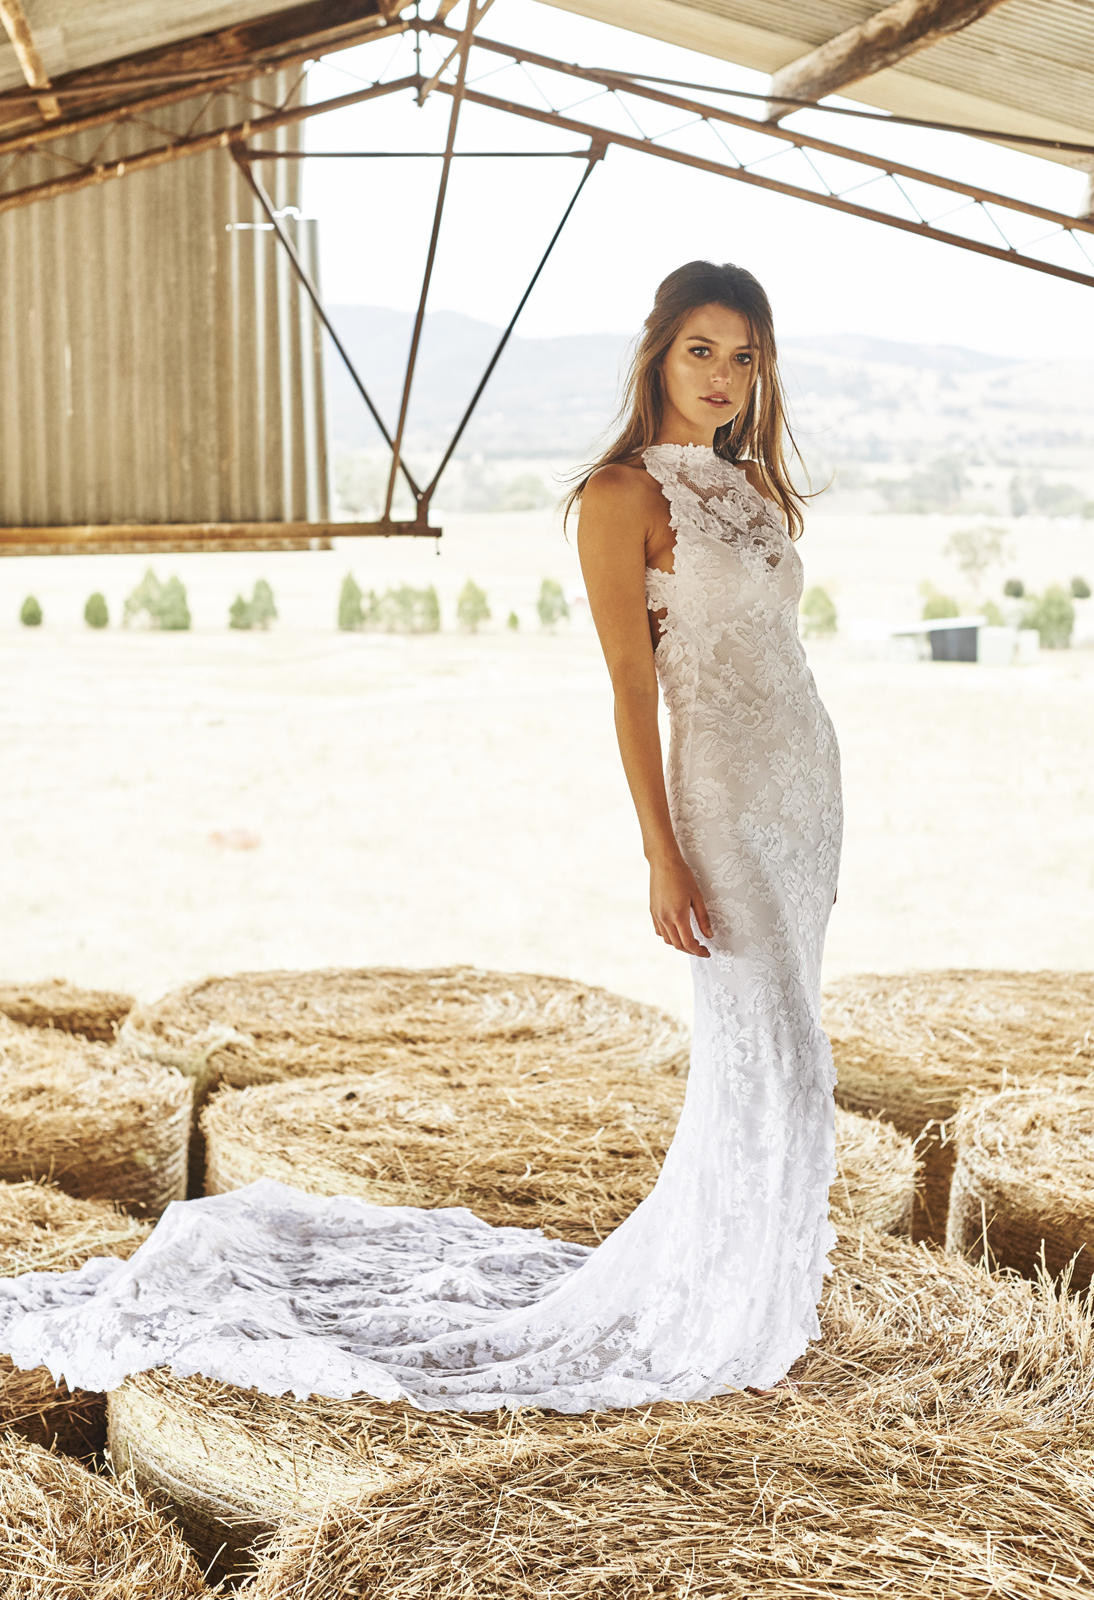 Country Style Wedding Dresses
 Grace Loves Lace Wedding Dresses Rustic Wedding Chic